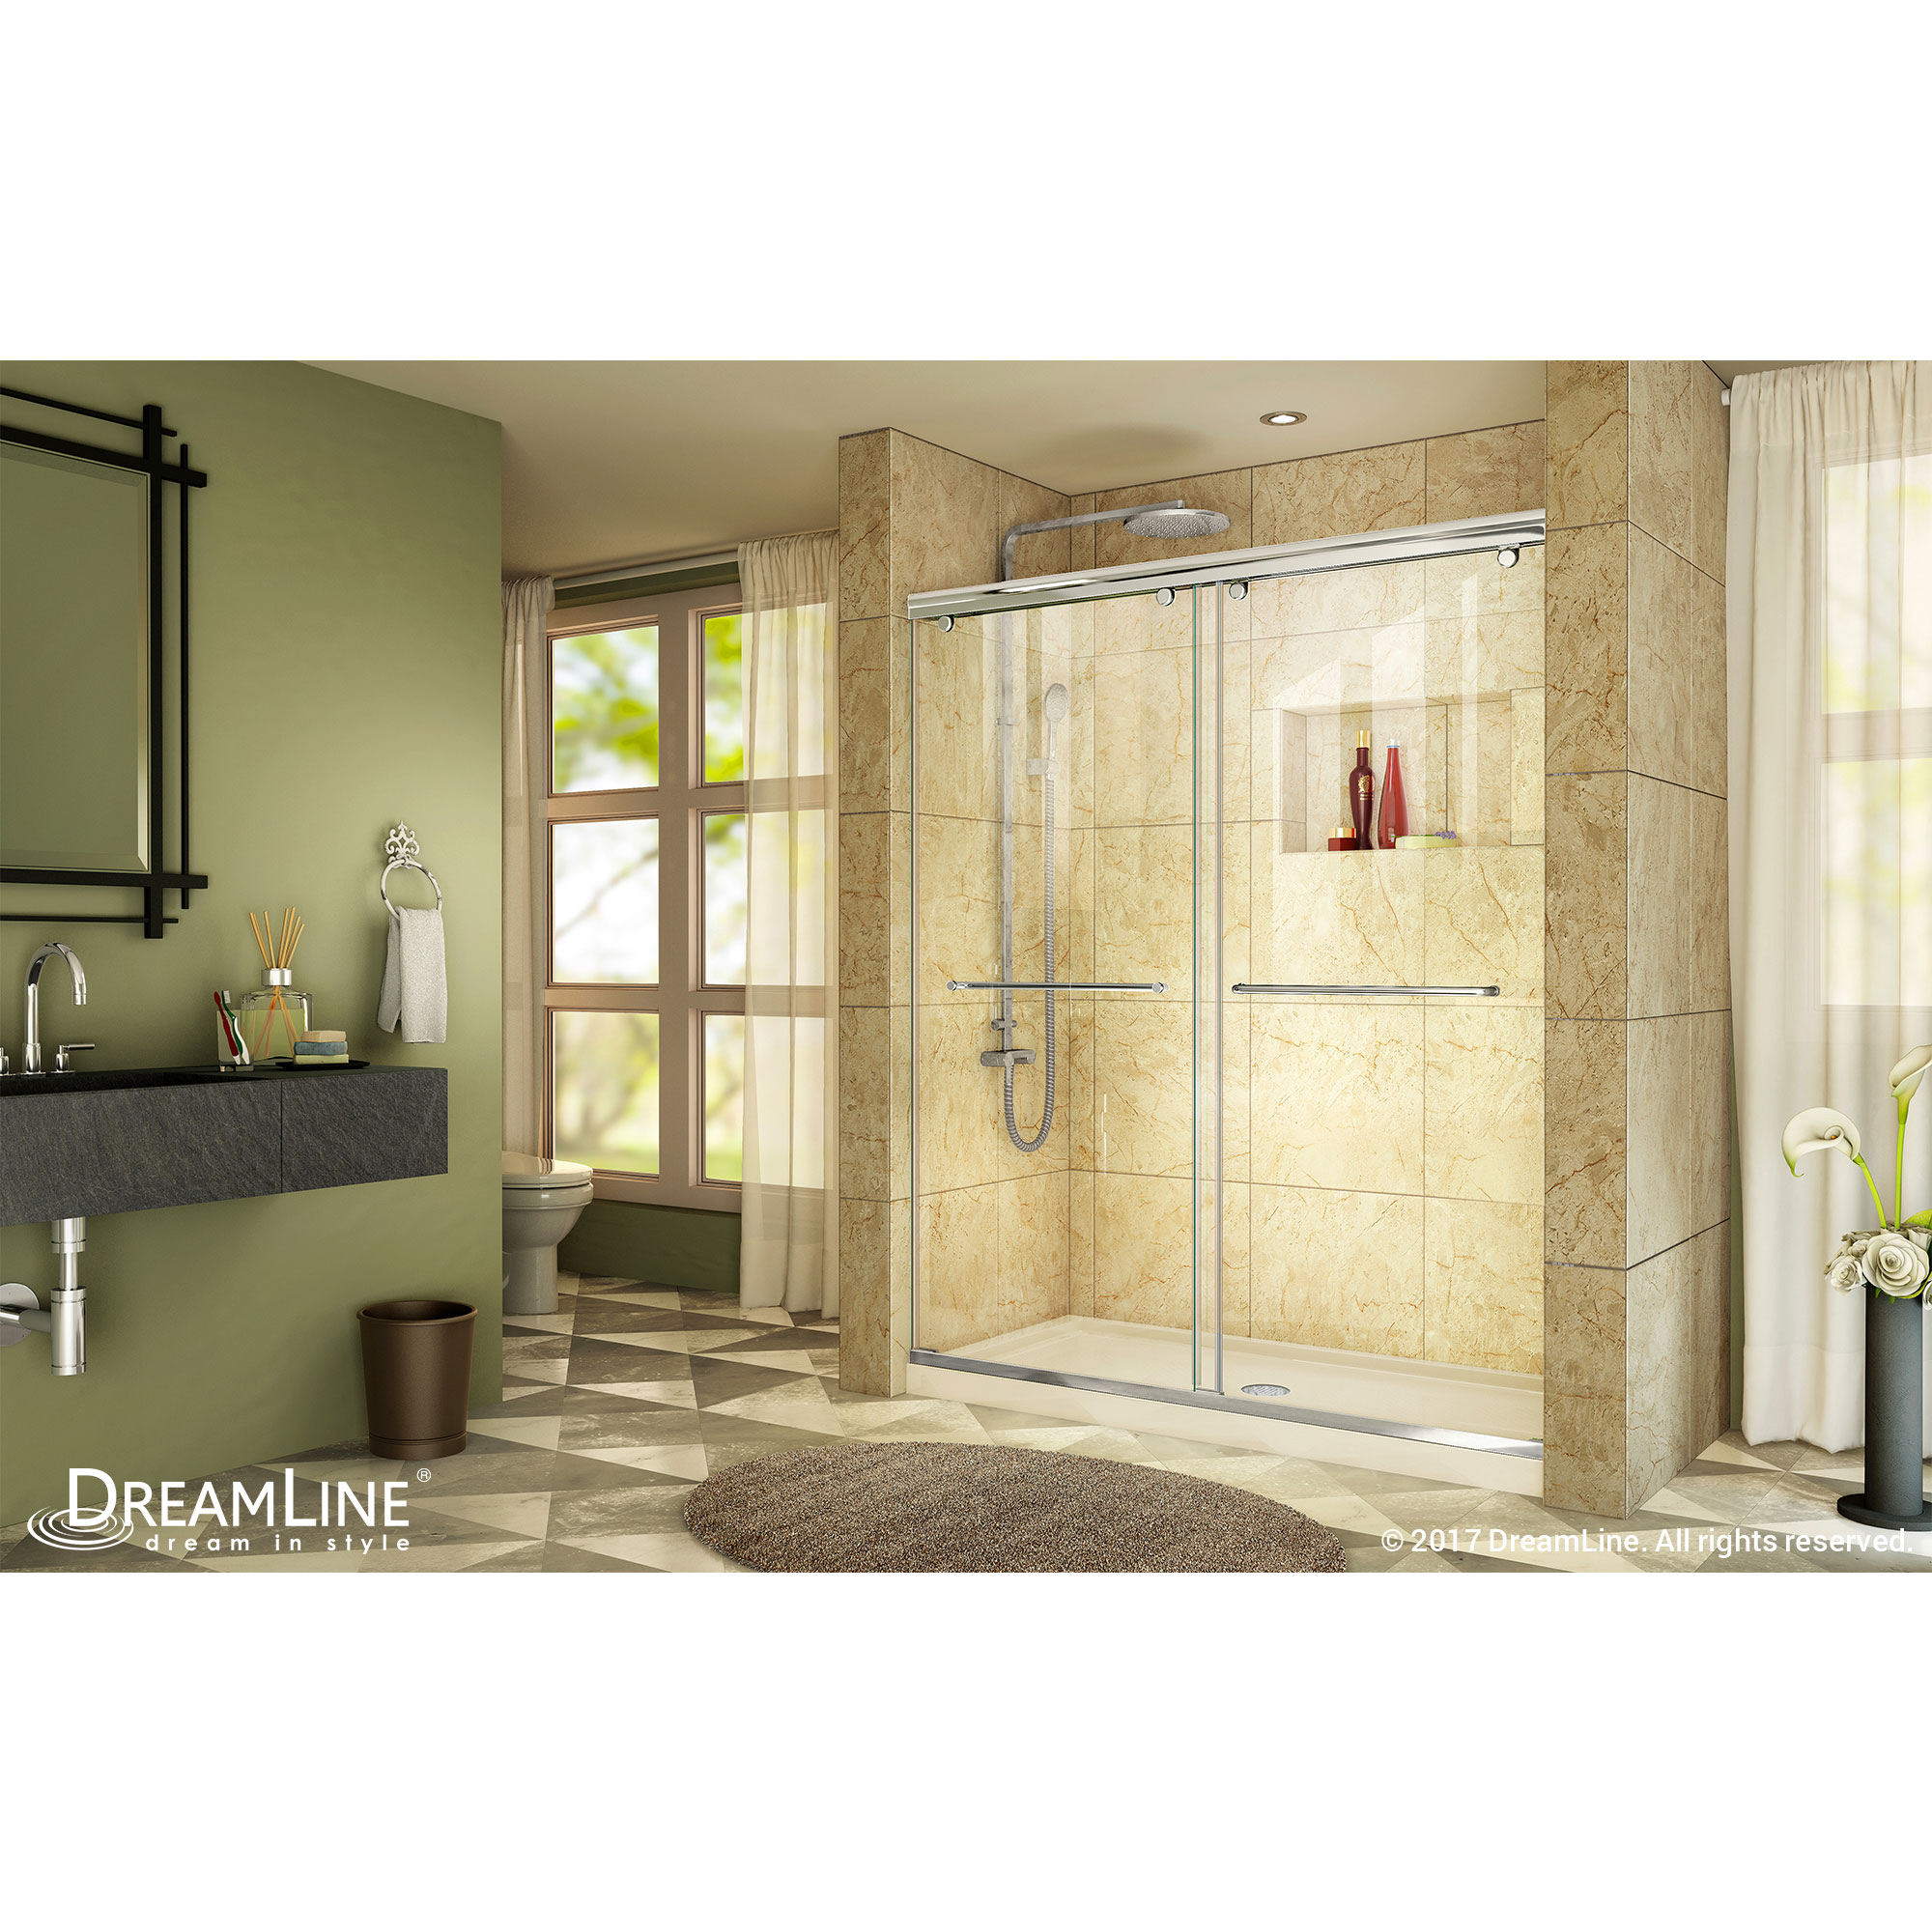 DreamLine Charisma 36 in. D x 60 in. W x 78 3/4 in. H Bypass Shower Door in Chrome with Center Drain Biscuit Base Kit